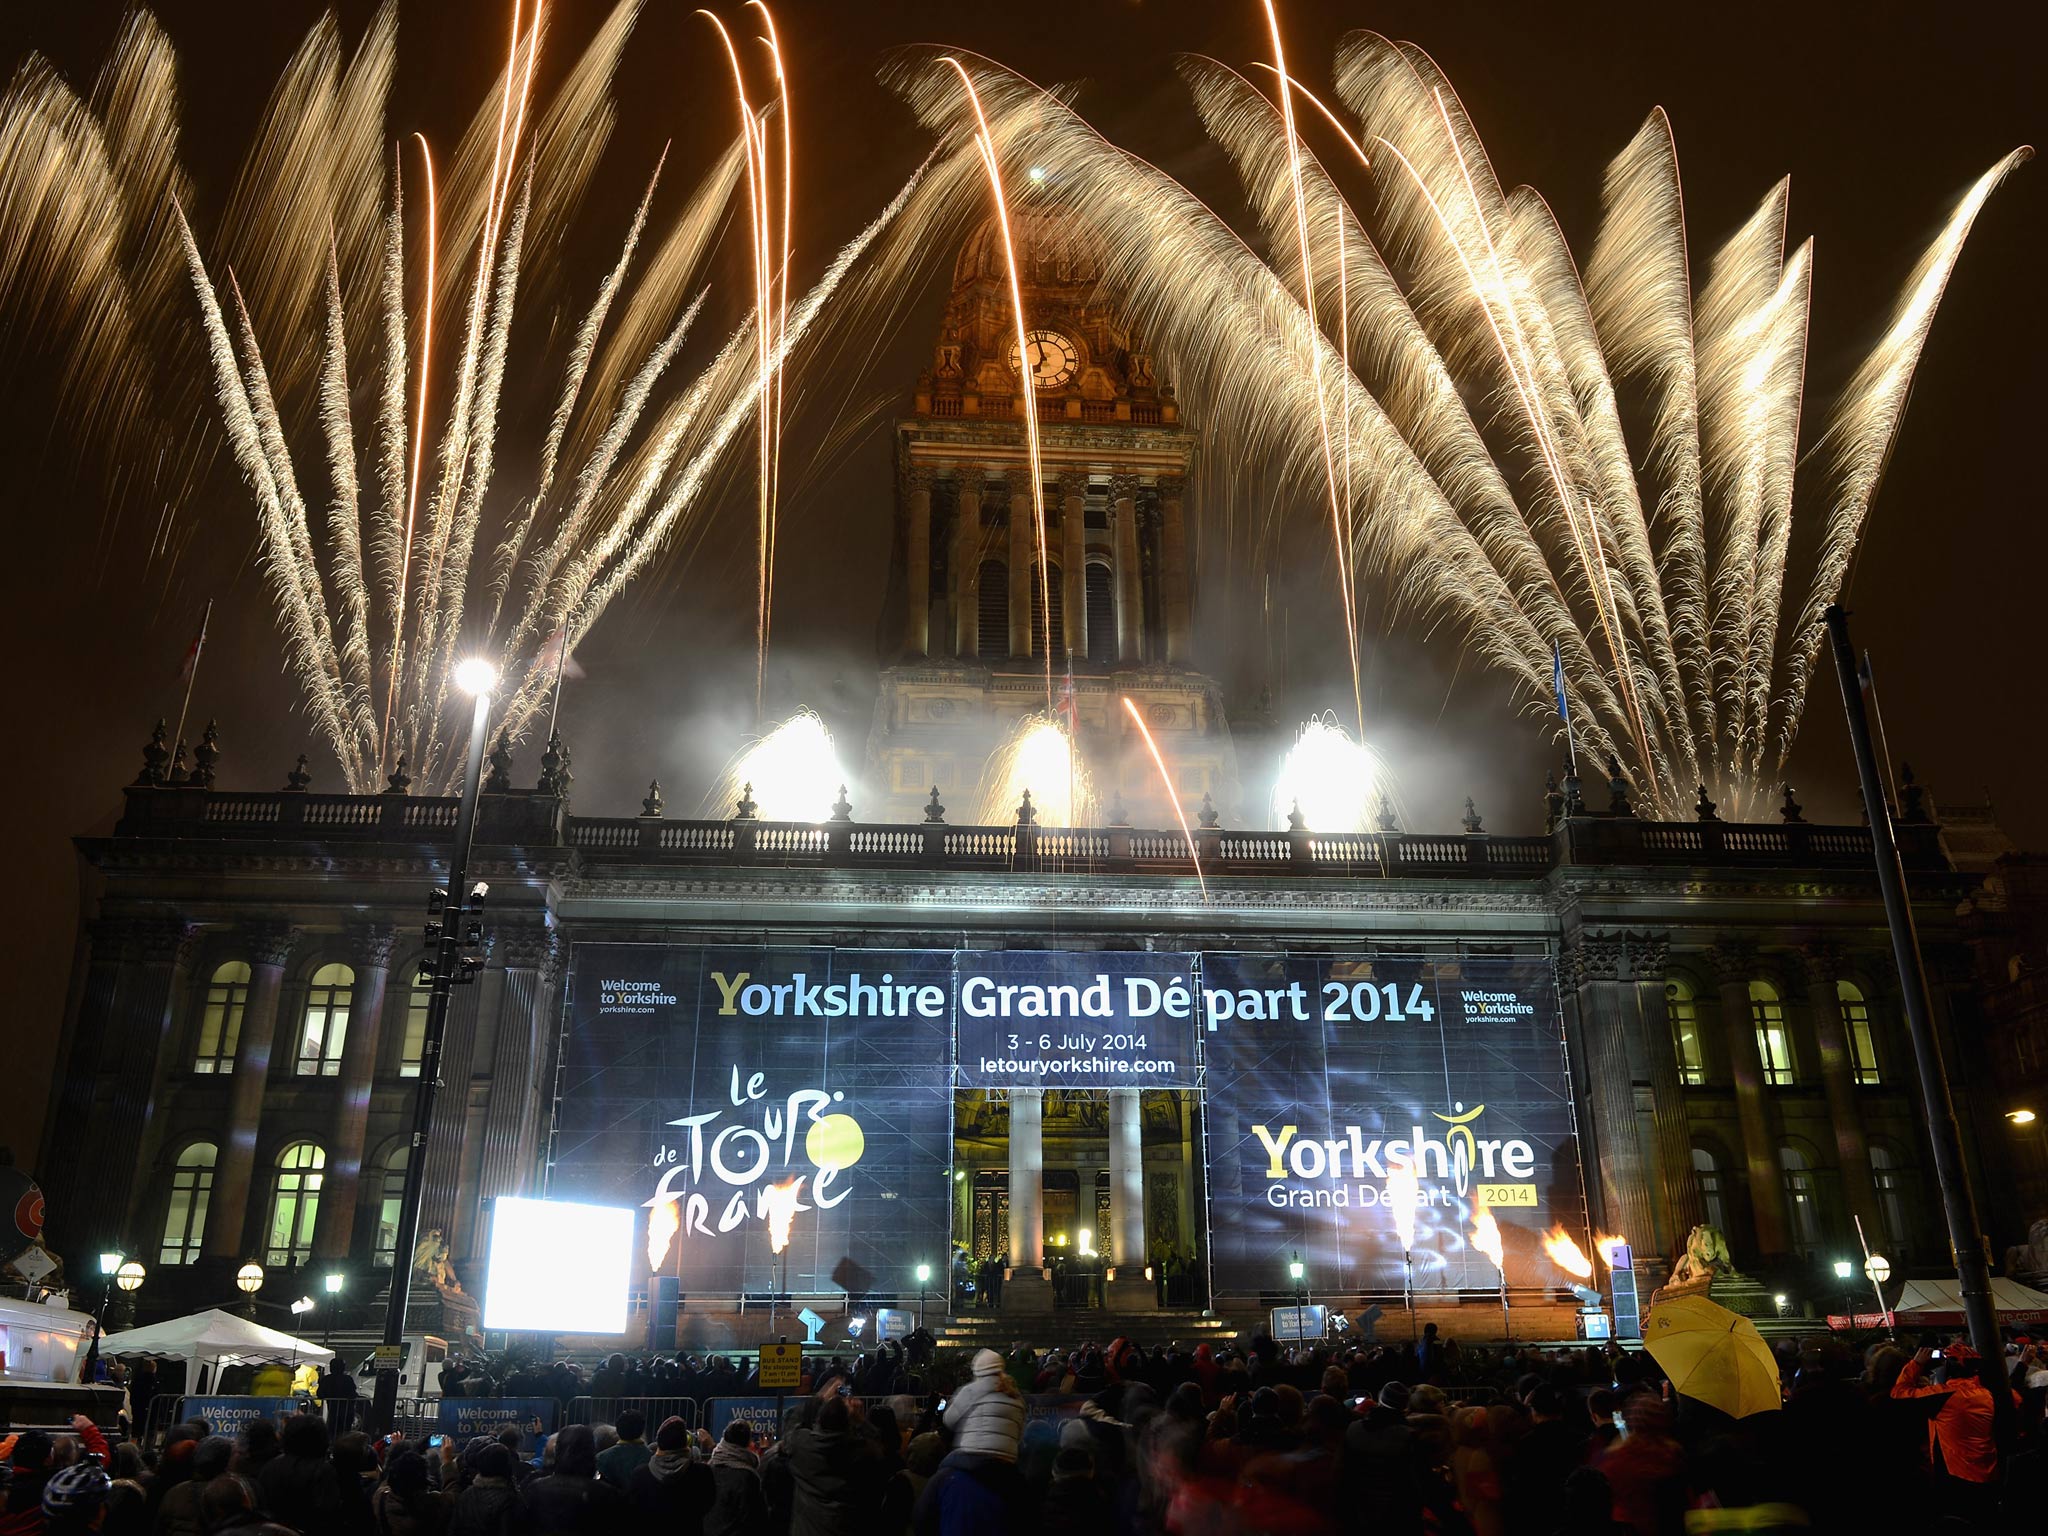 Yorkshire celebrates the announcement of the Grand Depart of the Tour de France 2014